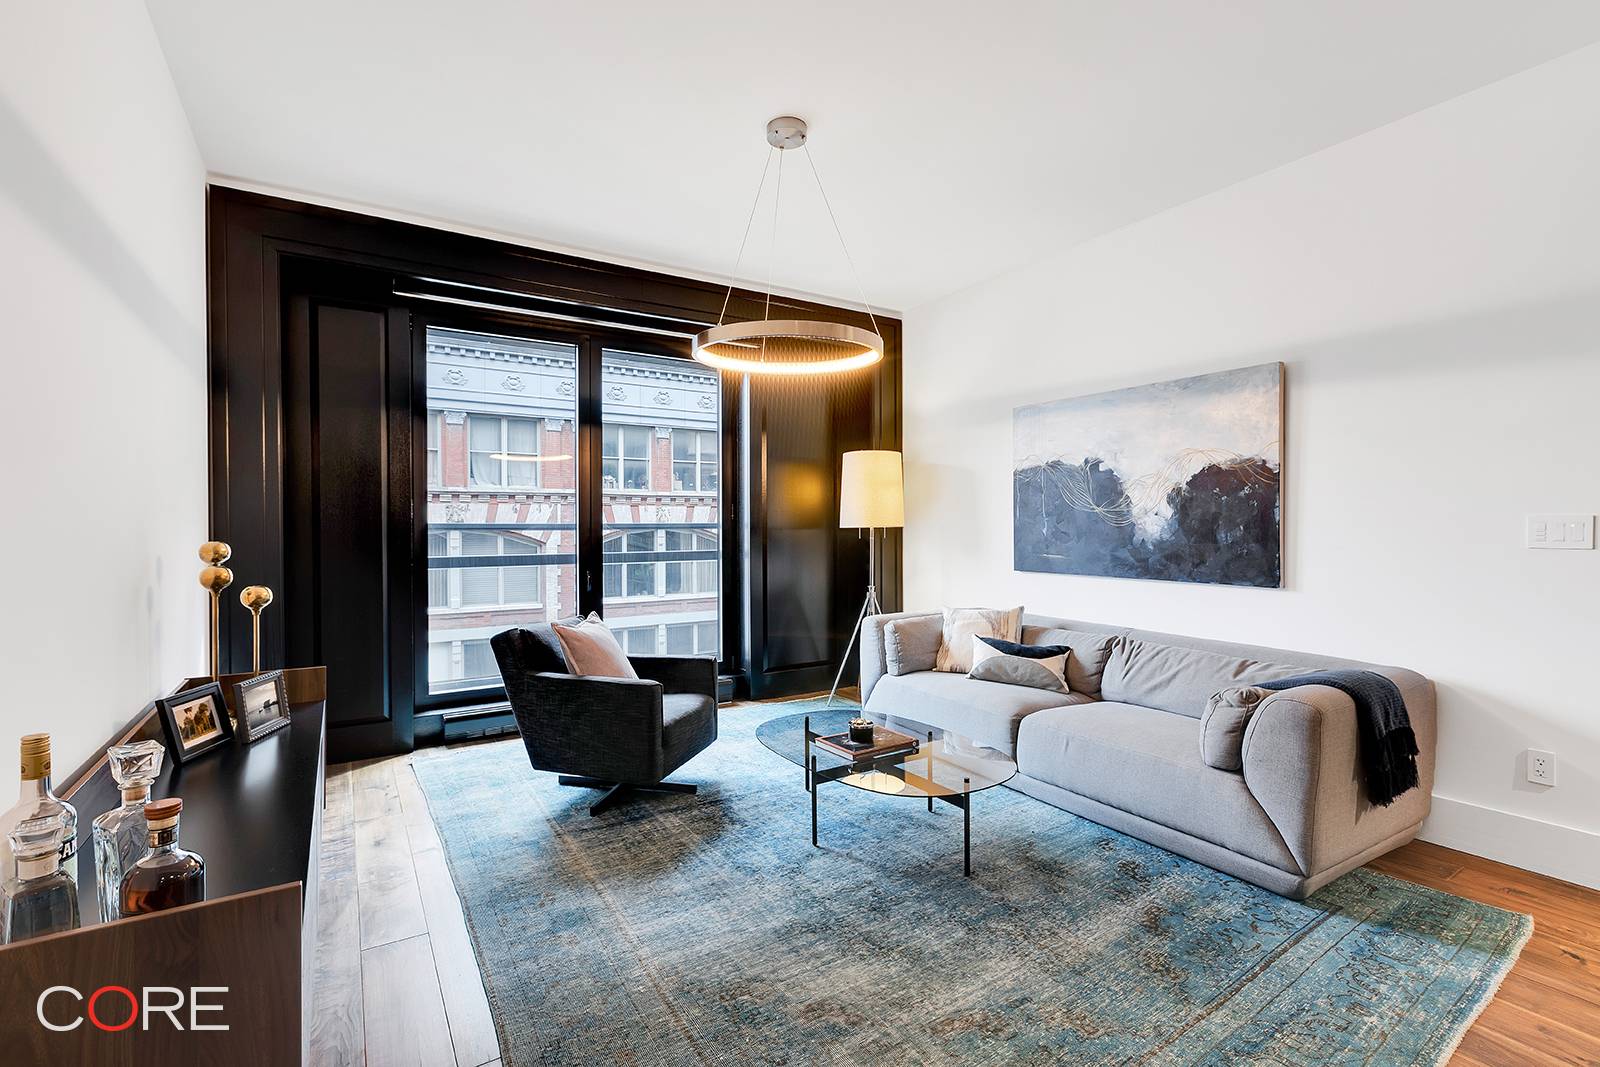 Unit 602 is a highly coveted, south facing, two bedroom residence which boasts oversized modern French doors and overlooks Chelsea's famous landmark carriage houses.